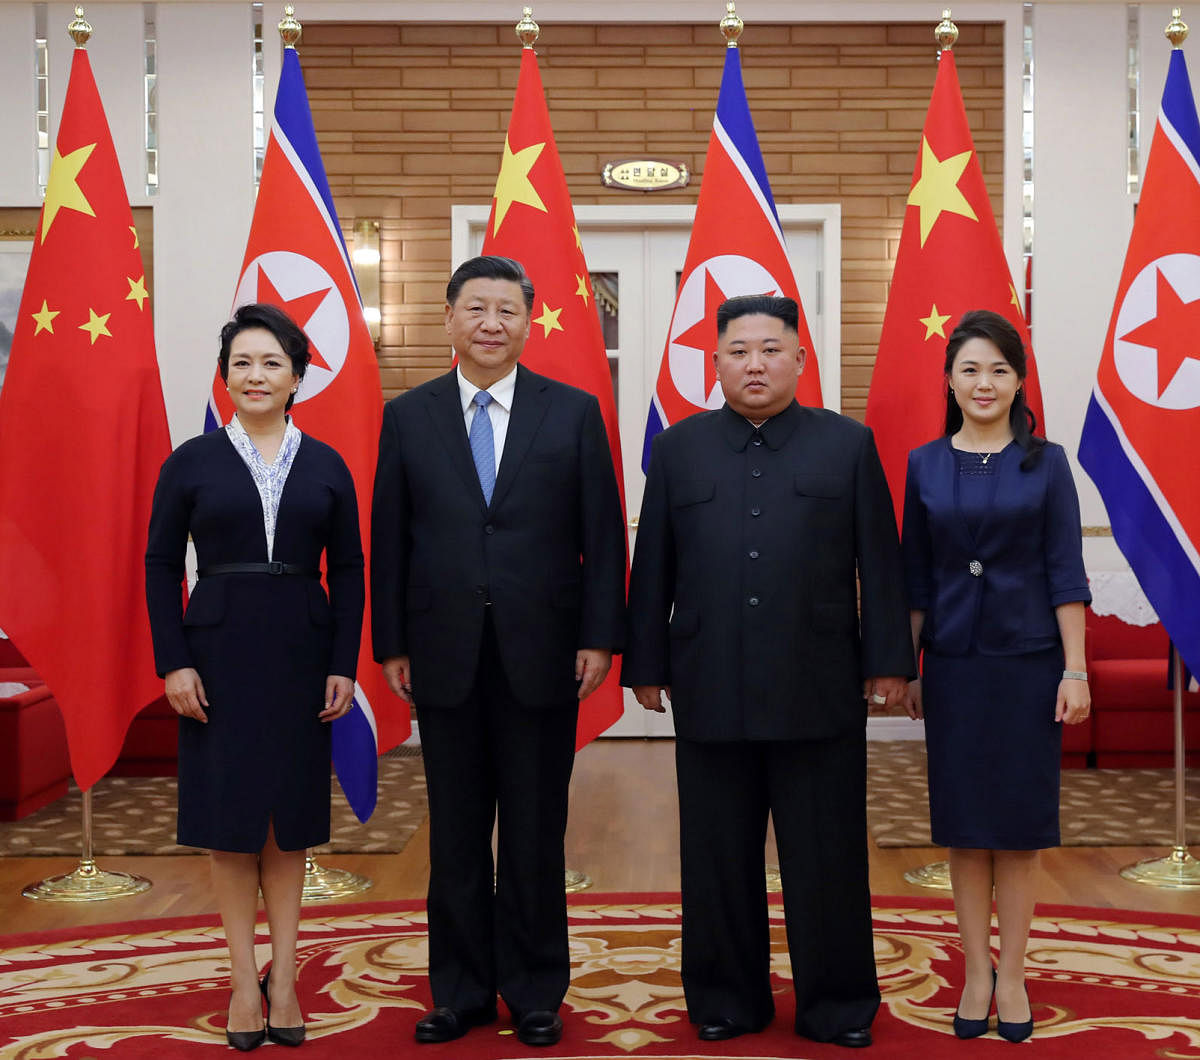 This June 20, 2019 picture released by North Korea's official Korean Central News Agency (KCNA) on June 21, 2019 shows North Korean leader Kim Jong Un, his wife Ri Sol Ju meeting Chinese President Xi Jinping  and his wife Peng Liyuan in Pyongyang. (Photo by KCNA VIA KNS / KCNA VIA KNS / AFP)